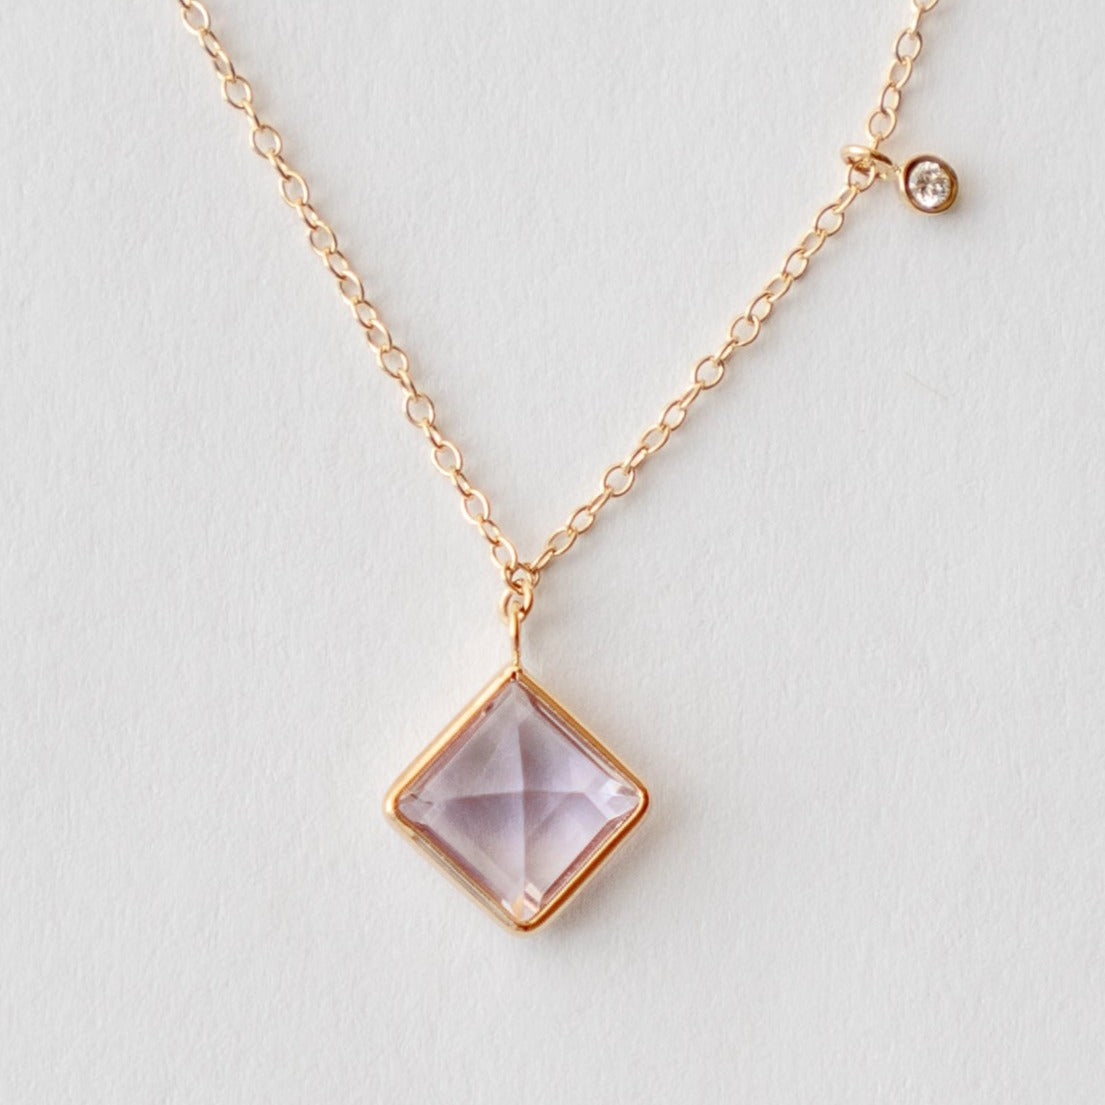 Delicate Tisa Necklace with Square amethyst and brilliant cut natural white diamond set in 14k yellow gold by SHW Fine Jewelry made in New York City